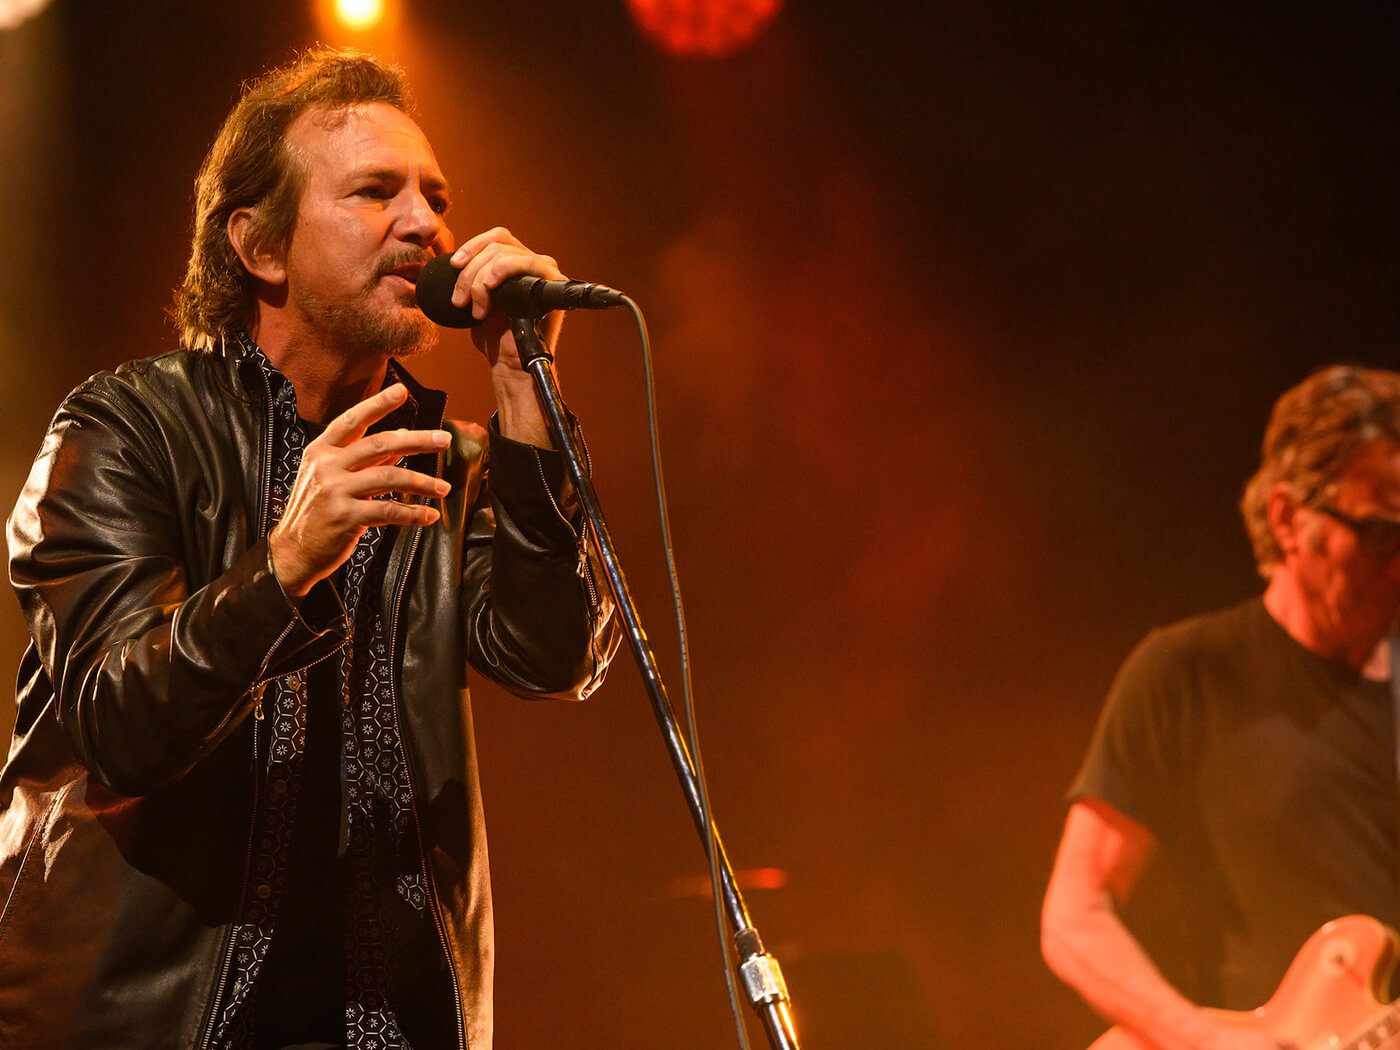 Pearl Jam discussed never playing again after Roskilde festival tragedy